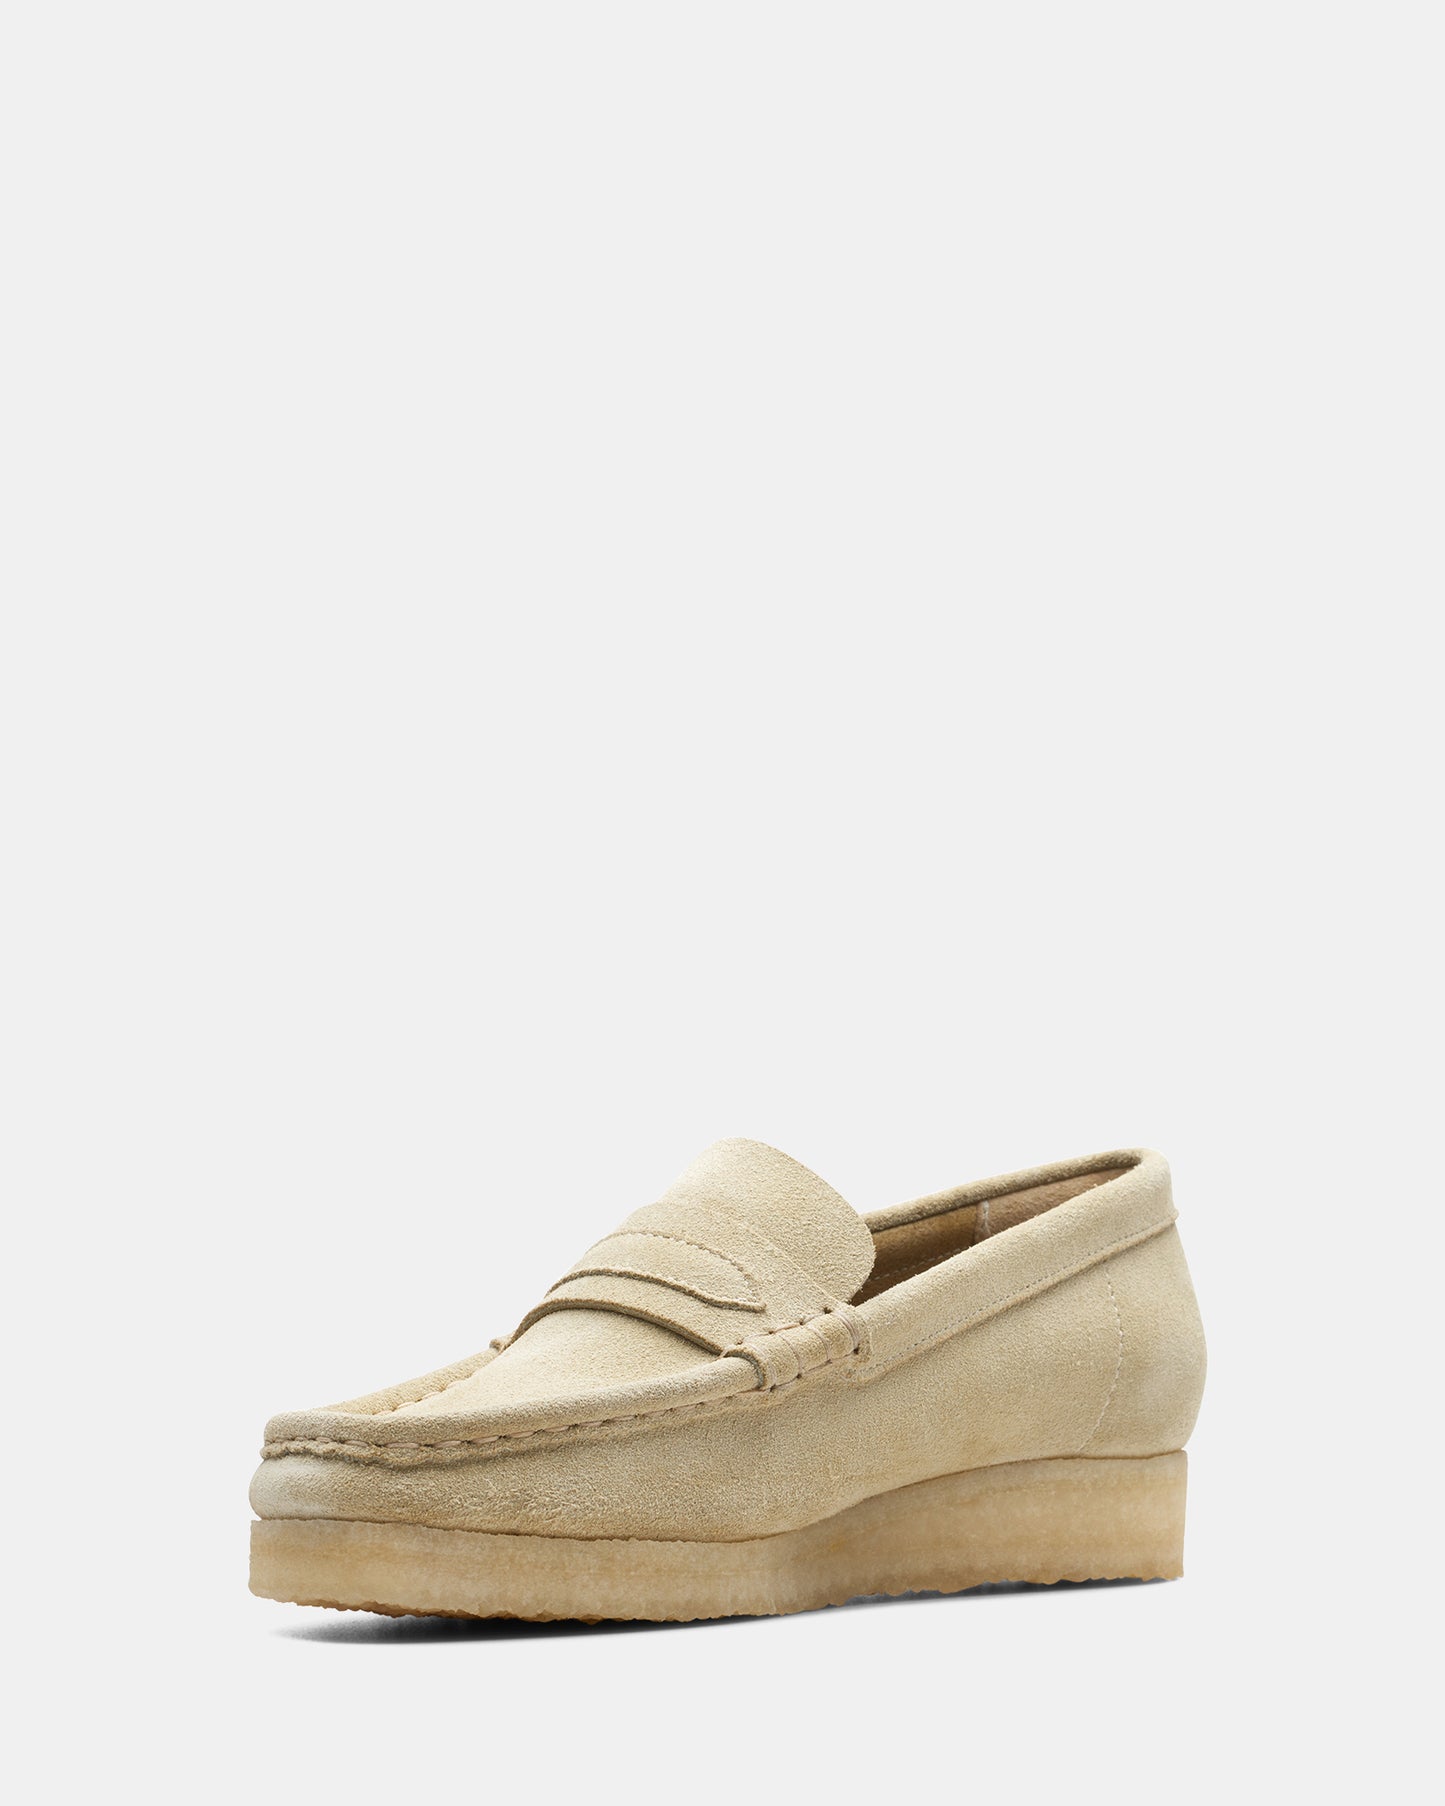 Wallabee Loafer Maple Suede